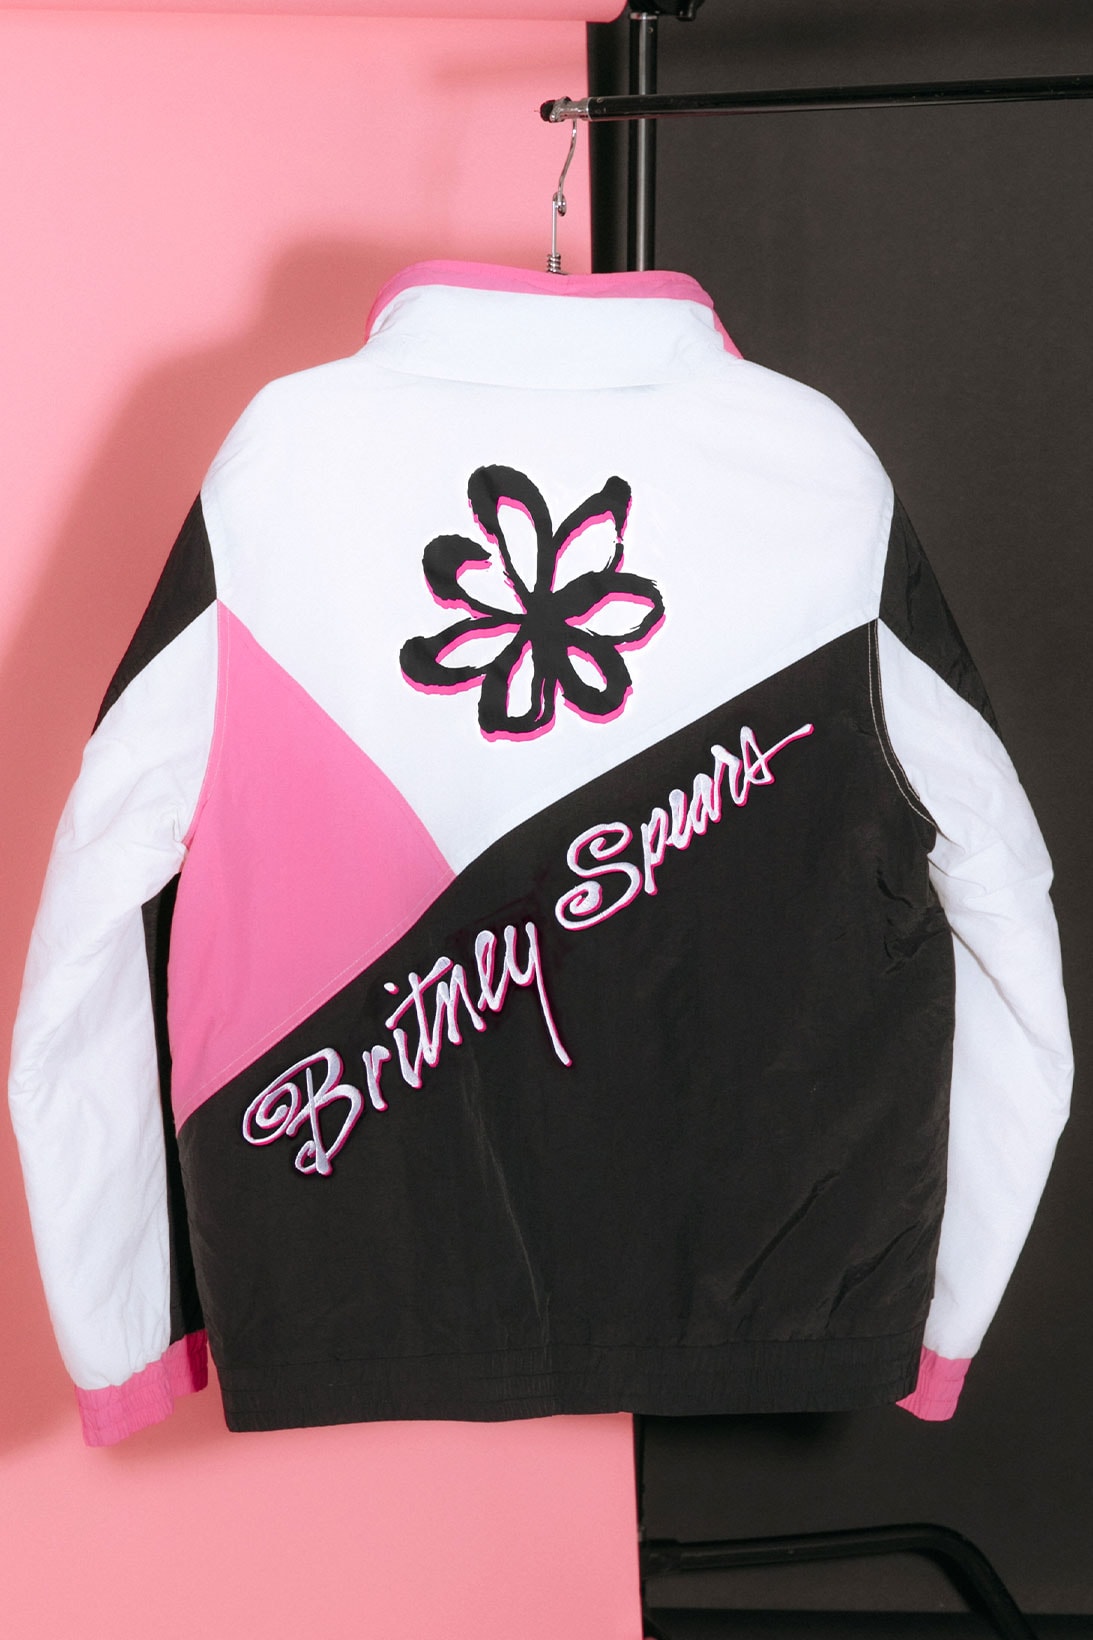 britney spears the hundreds collaboration 1999 debut album tshirts hoodies fleece jackets